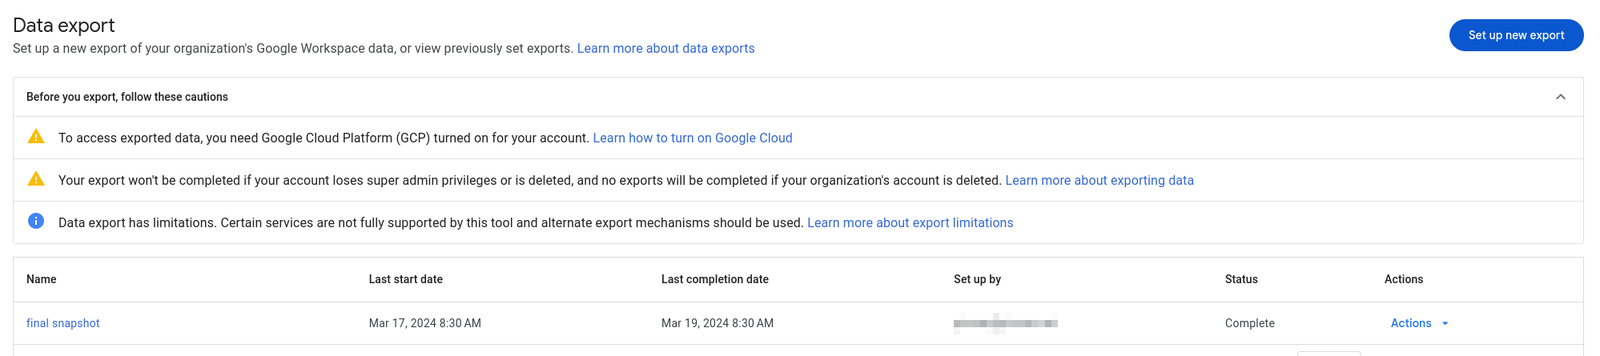 Google Workspace data export page